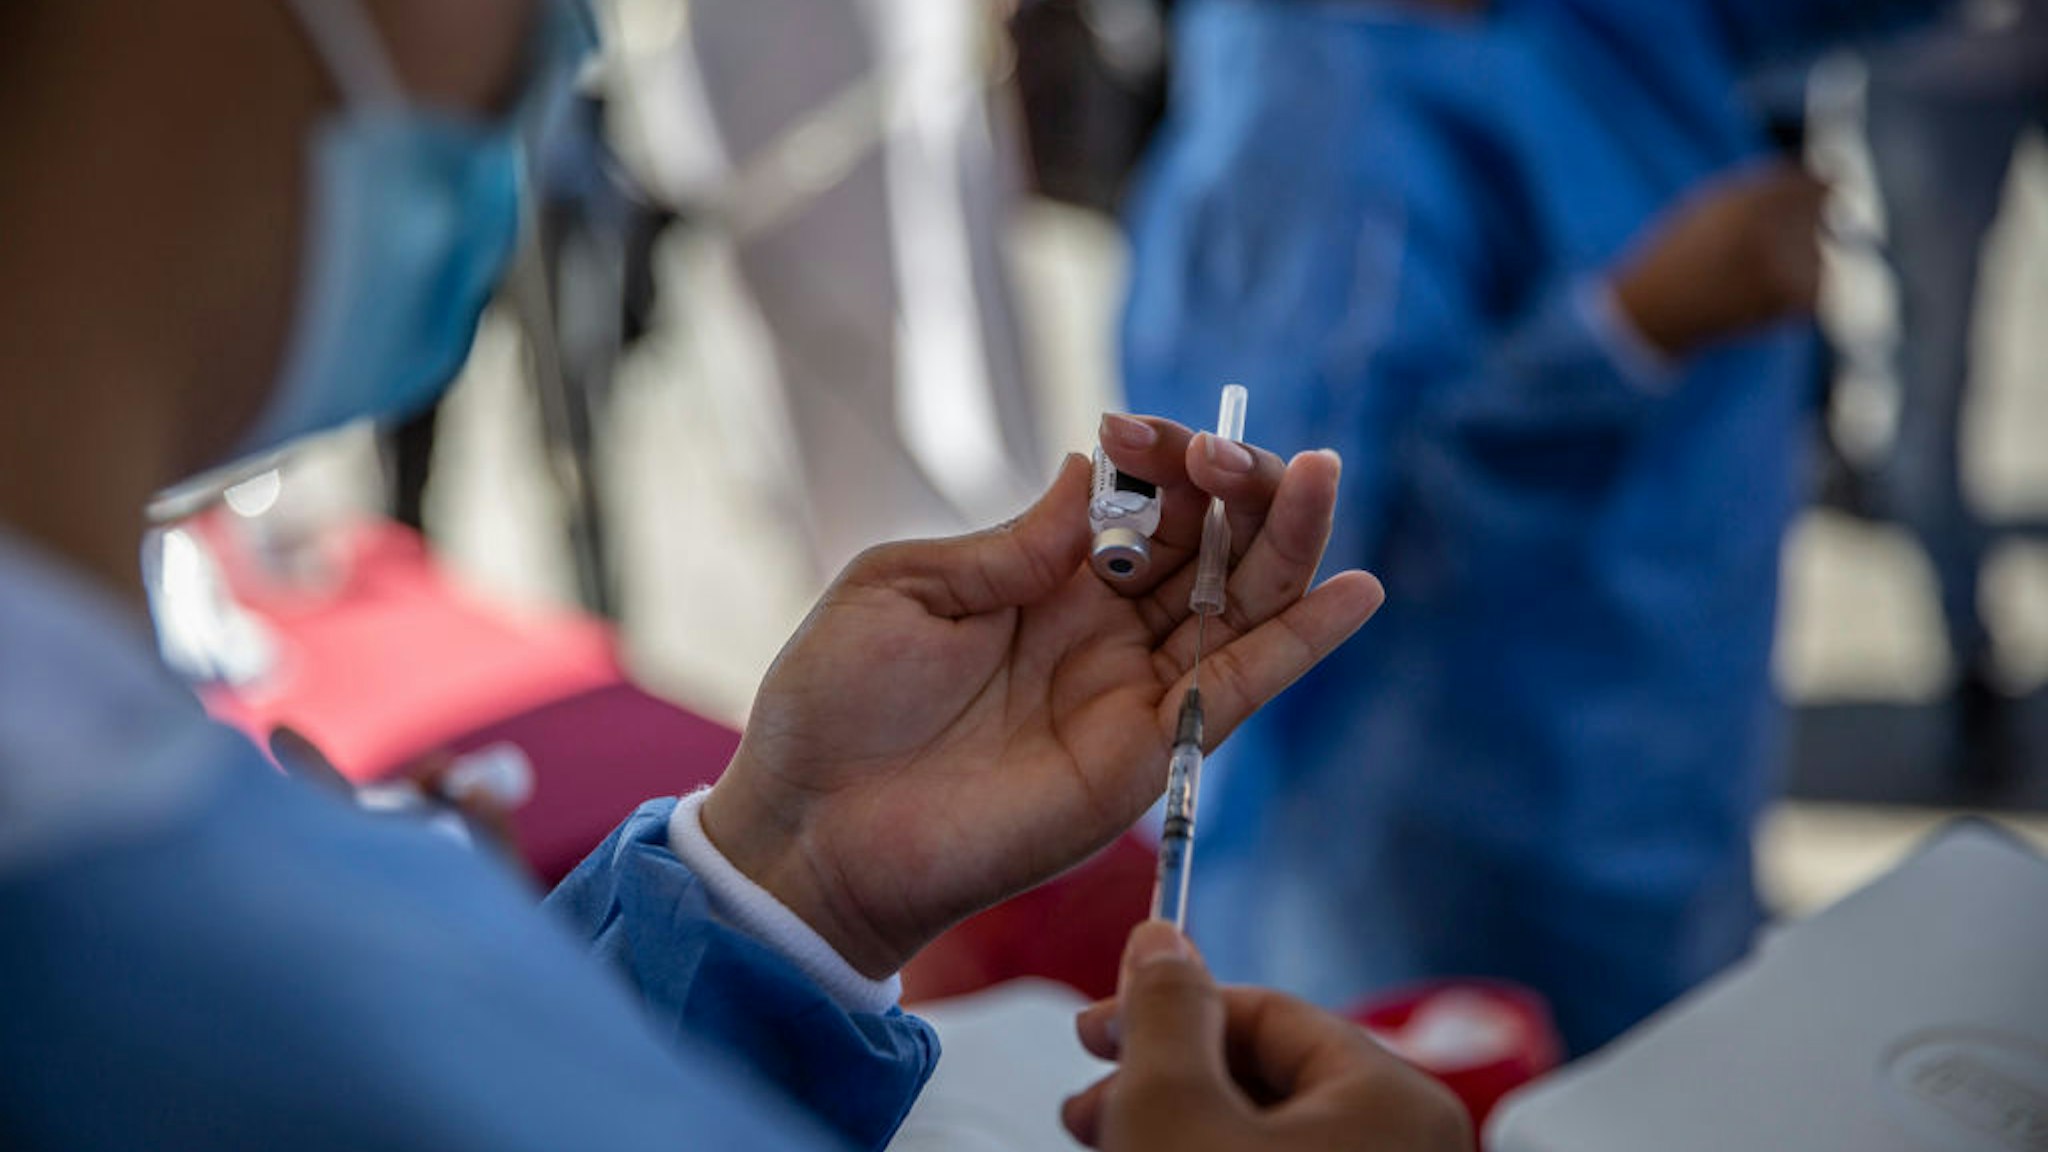 3 August 2021, Mexico, Tijuana: A health worker prepares a Corona vaccination as part of a vaccination drive for migrants outside the El Chaparral border crossing. The action was organized by the health department of the Mexican state of Baja California. More than 500 migrants living in an improvised camp at the border crossing were to receive the Corona vaccine from Pfizer-Biontech. Photo: Stringer/dpa (Photo by Stringer/picture alliance via Getty Images)